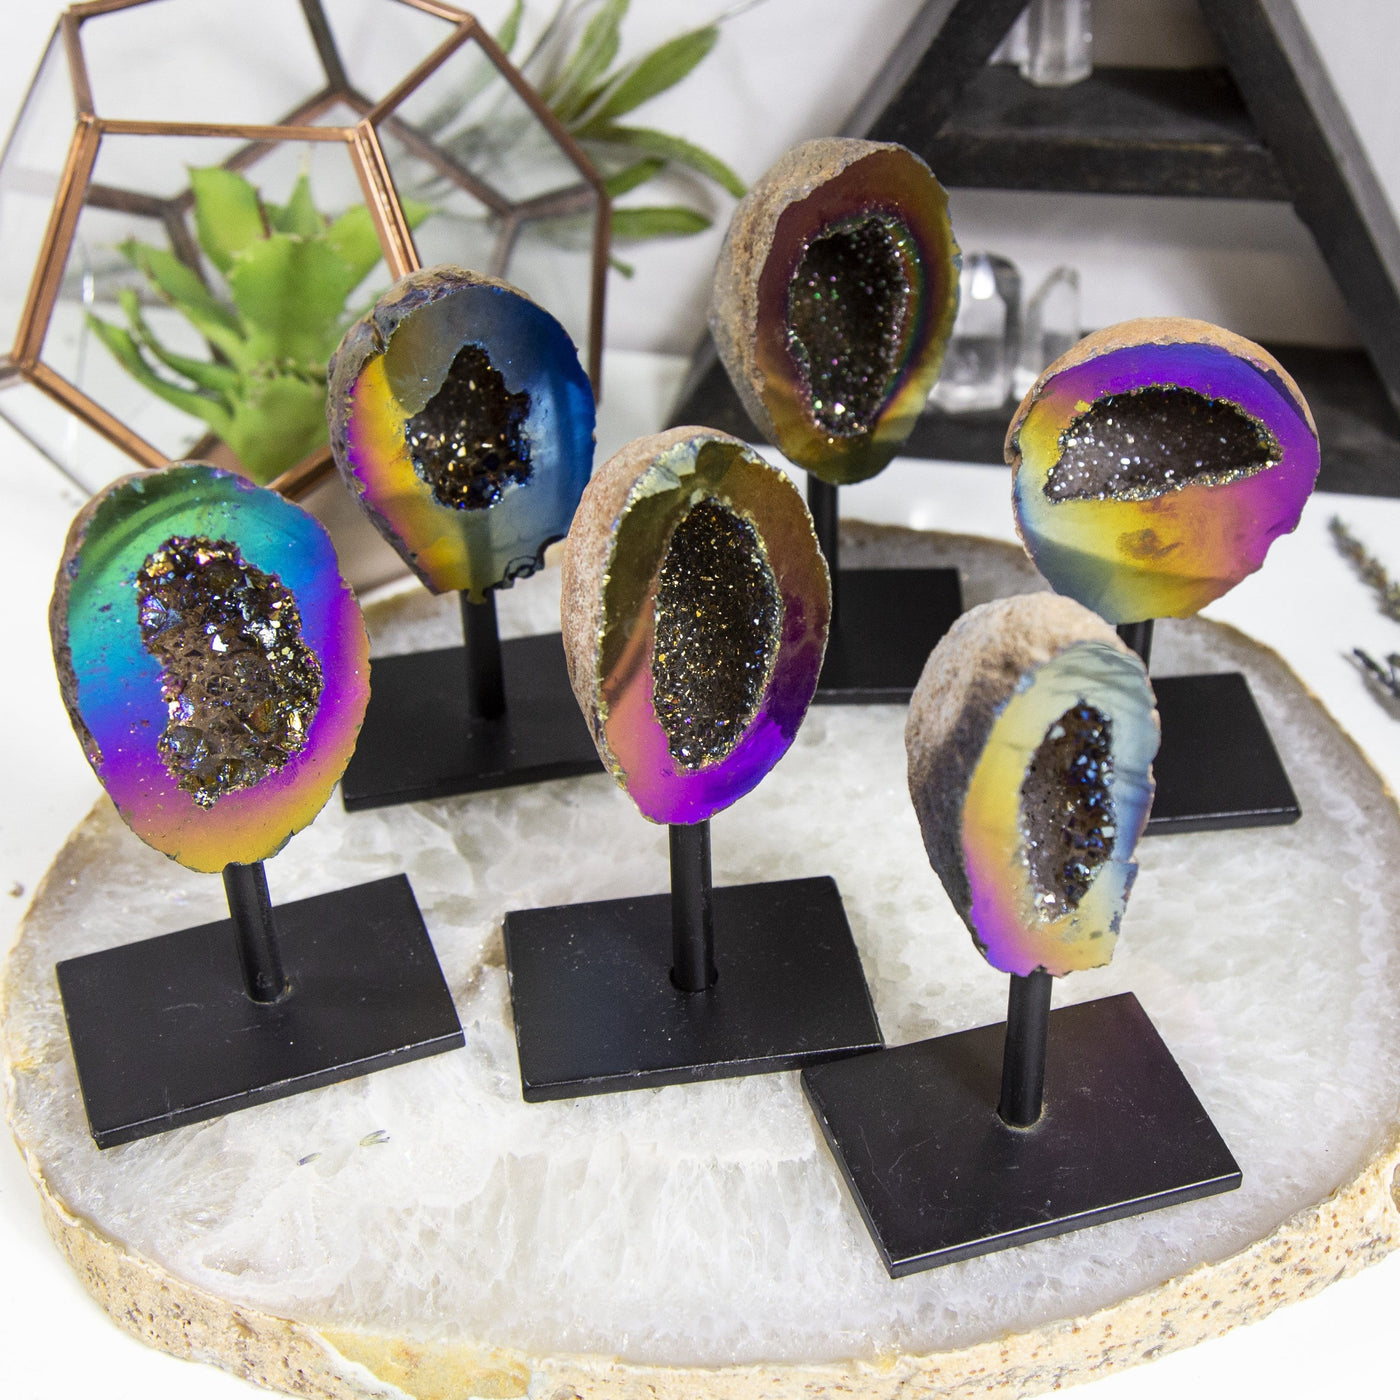 6 Rainbow Aura Geodes on Stands with various items in the background